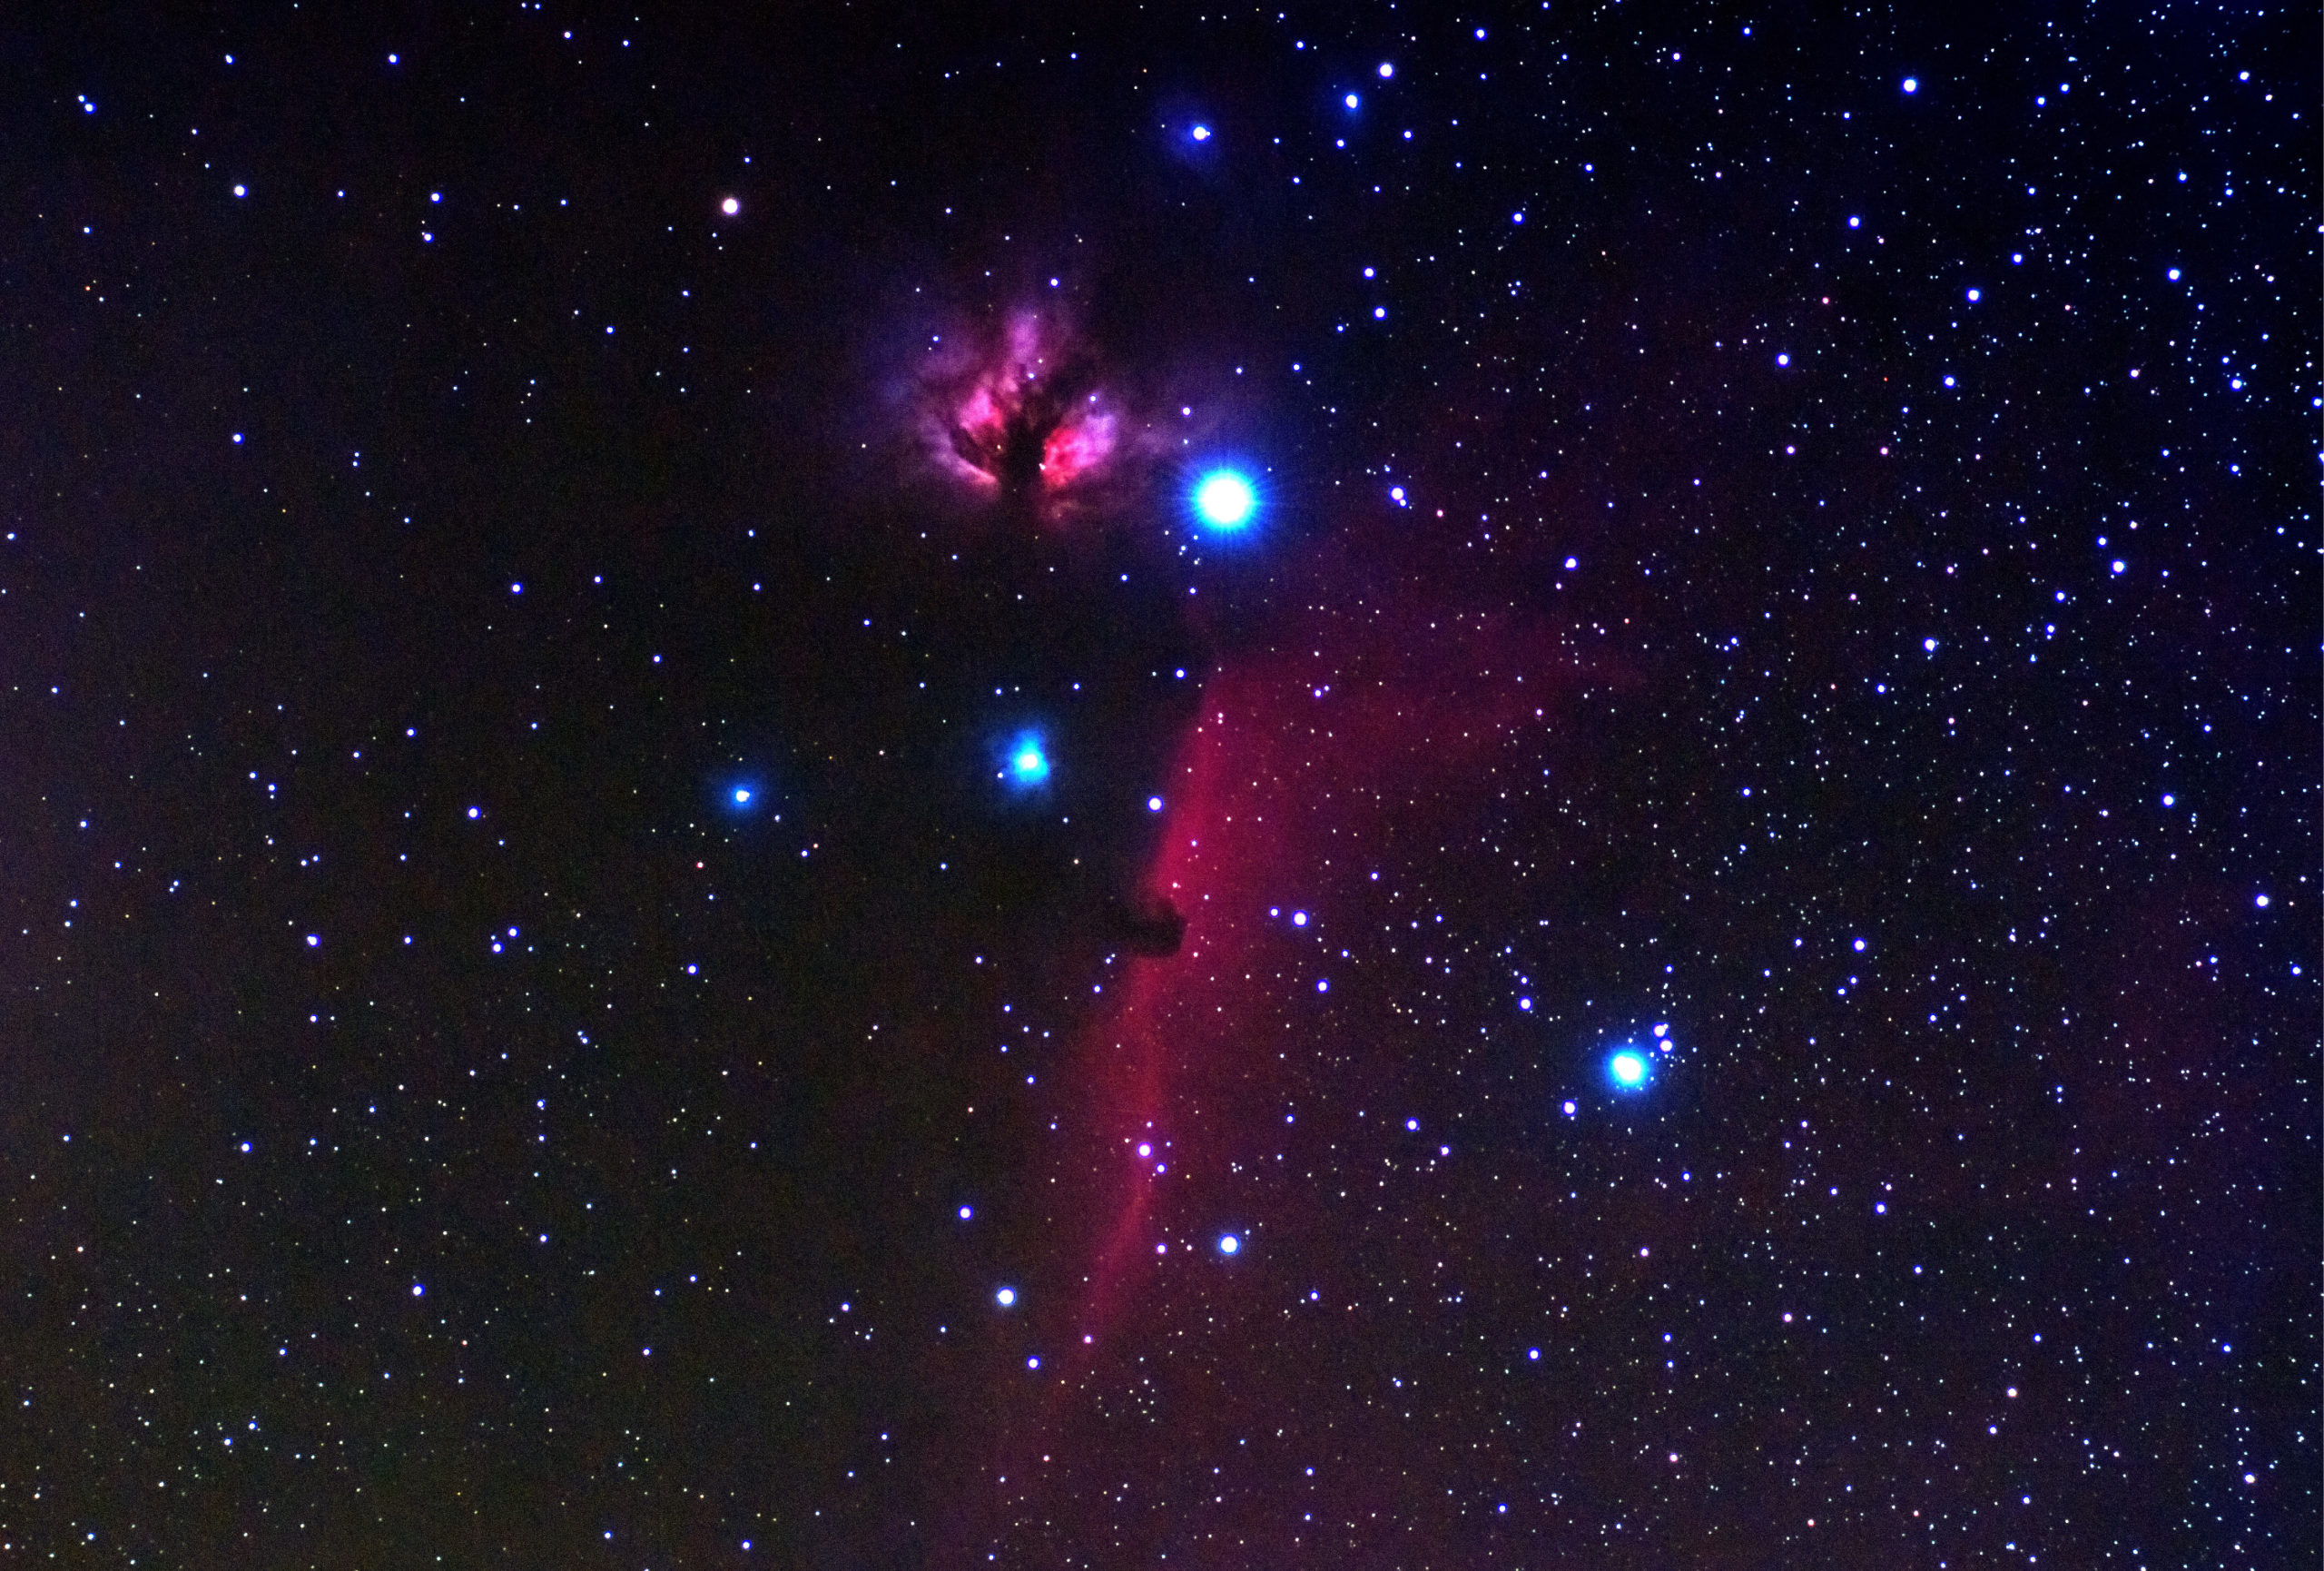 Flame and Horsehead Nebulae in Orion Constellation